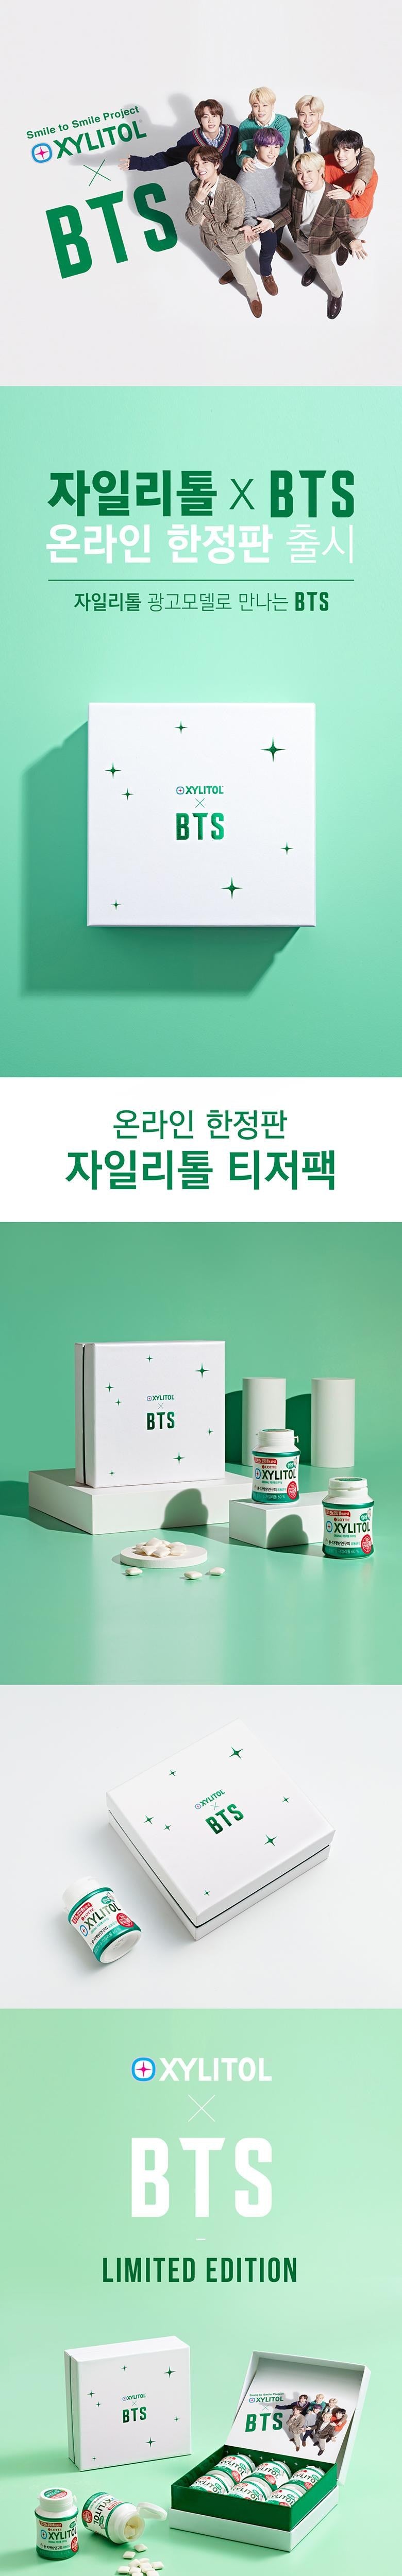 [BTS] Xylitol x BTS Limited Edition